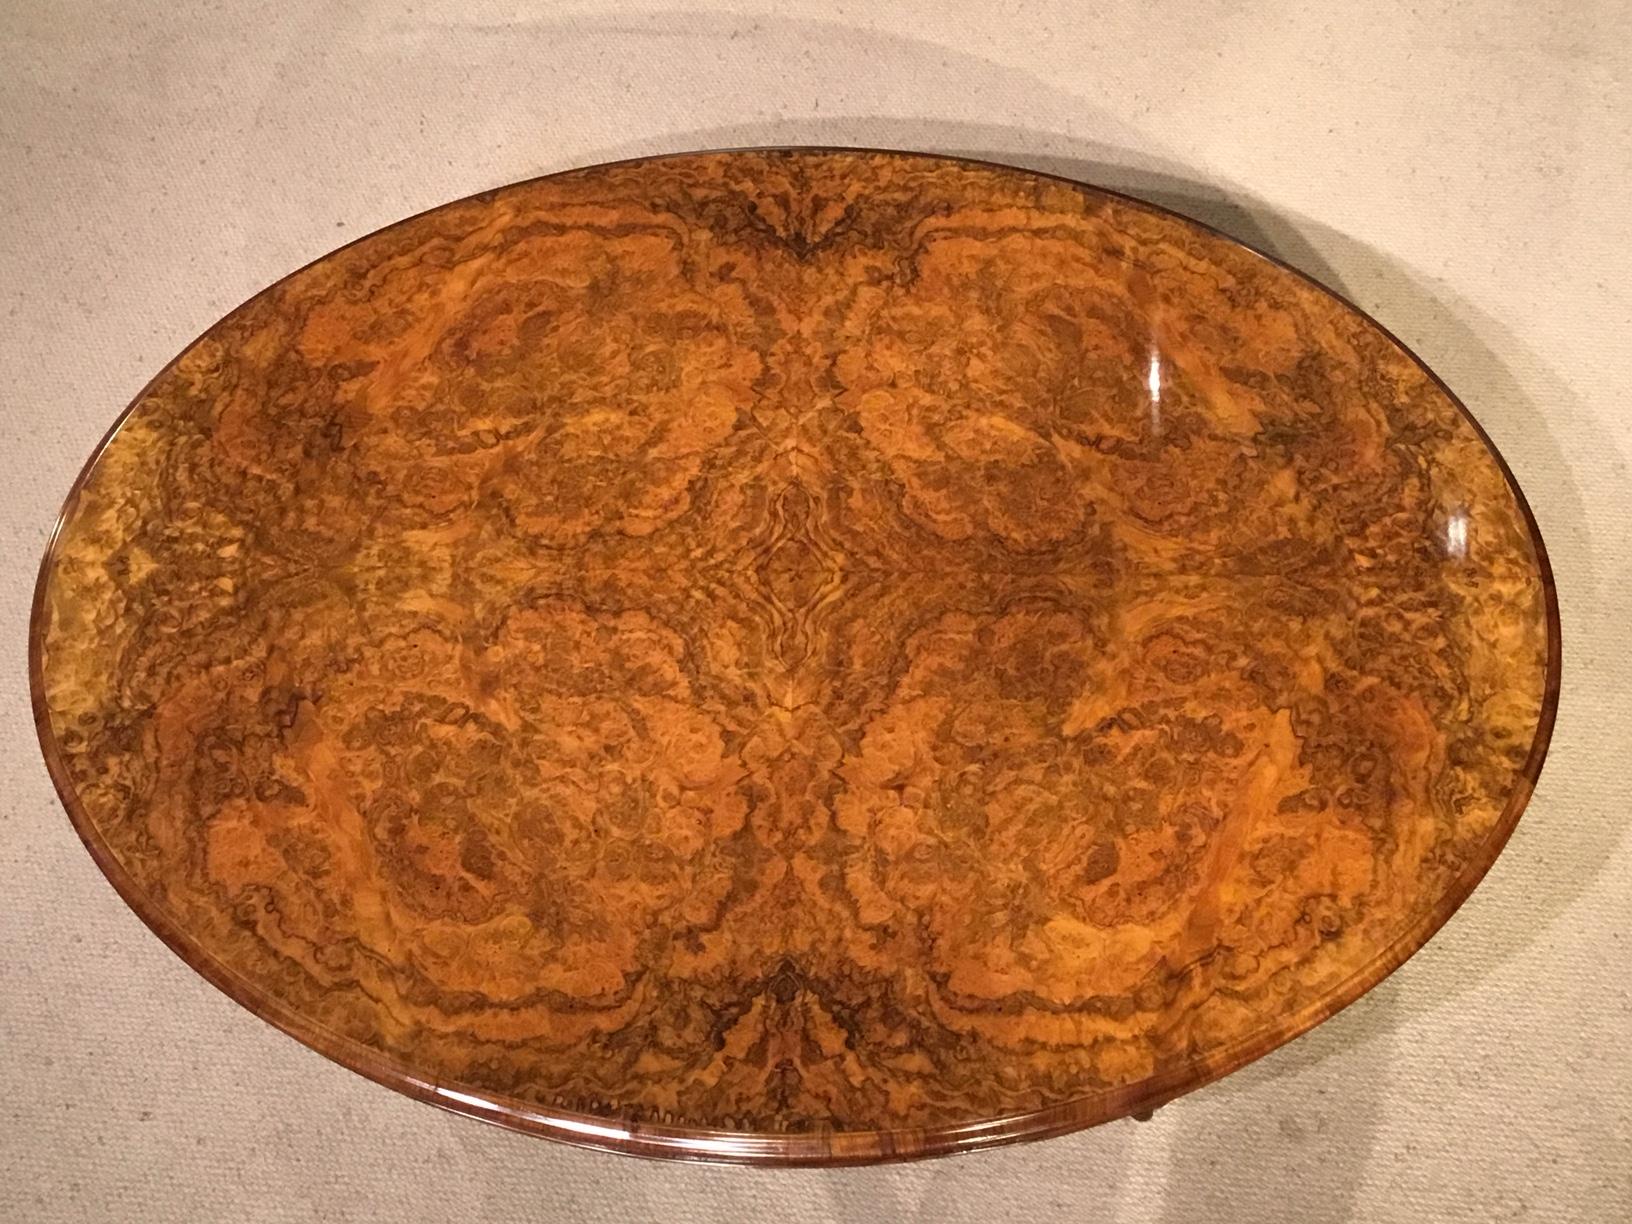 A superb large burr walnut Victorian period coffee table. Having an oval top veneered in the finest burr walnut with a beautiful colour and finish. With a walnut moulded edge, burr walnut frieze and supported on four turned and finely carved column